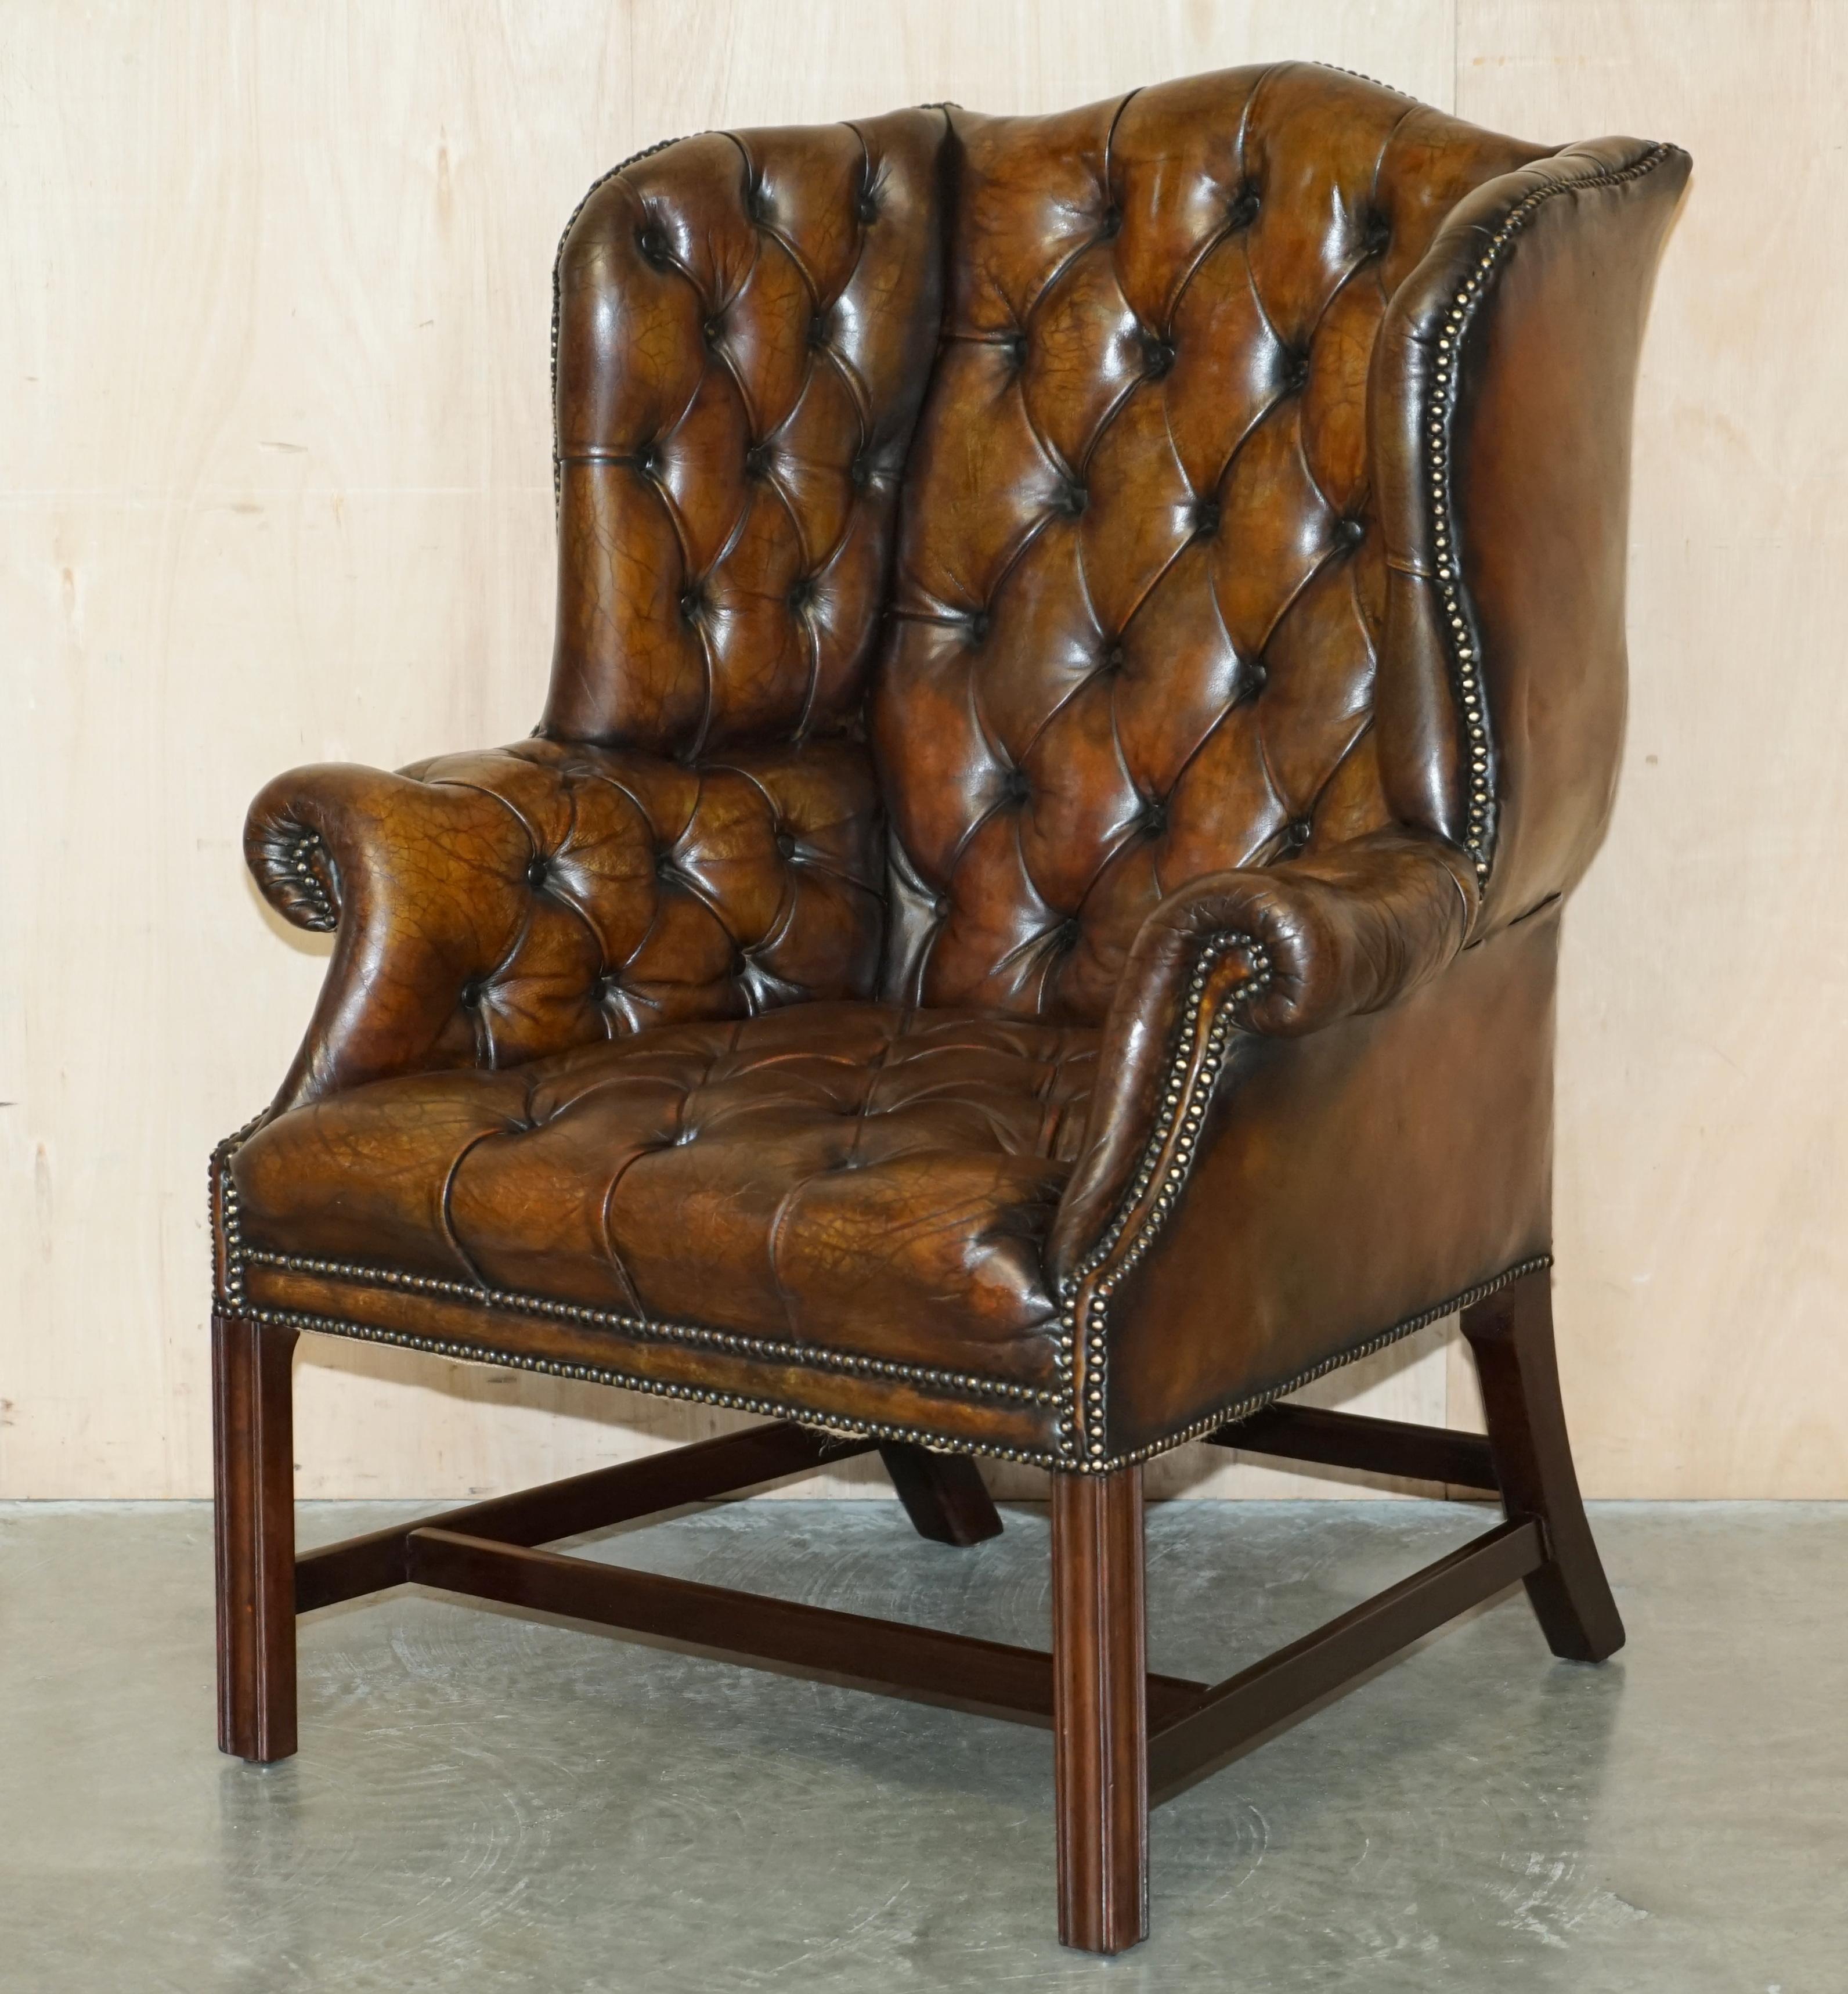 Royal House Antiques

Royal House Antiques is delighted to offer for sale this stunning pair of fully restored, hand dyed Cigar brown leather, circa 1920's Wingback armchairs 

Please note the delivery fee listed is just a guide, it covers within